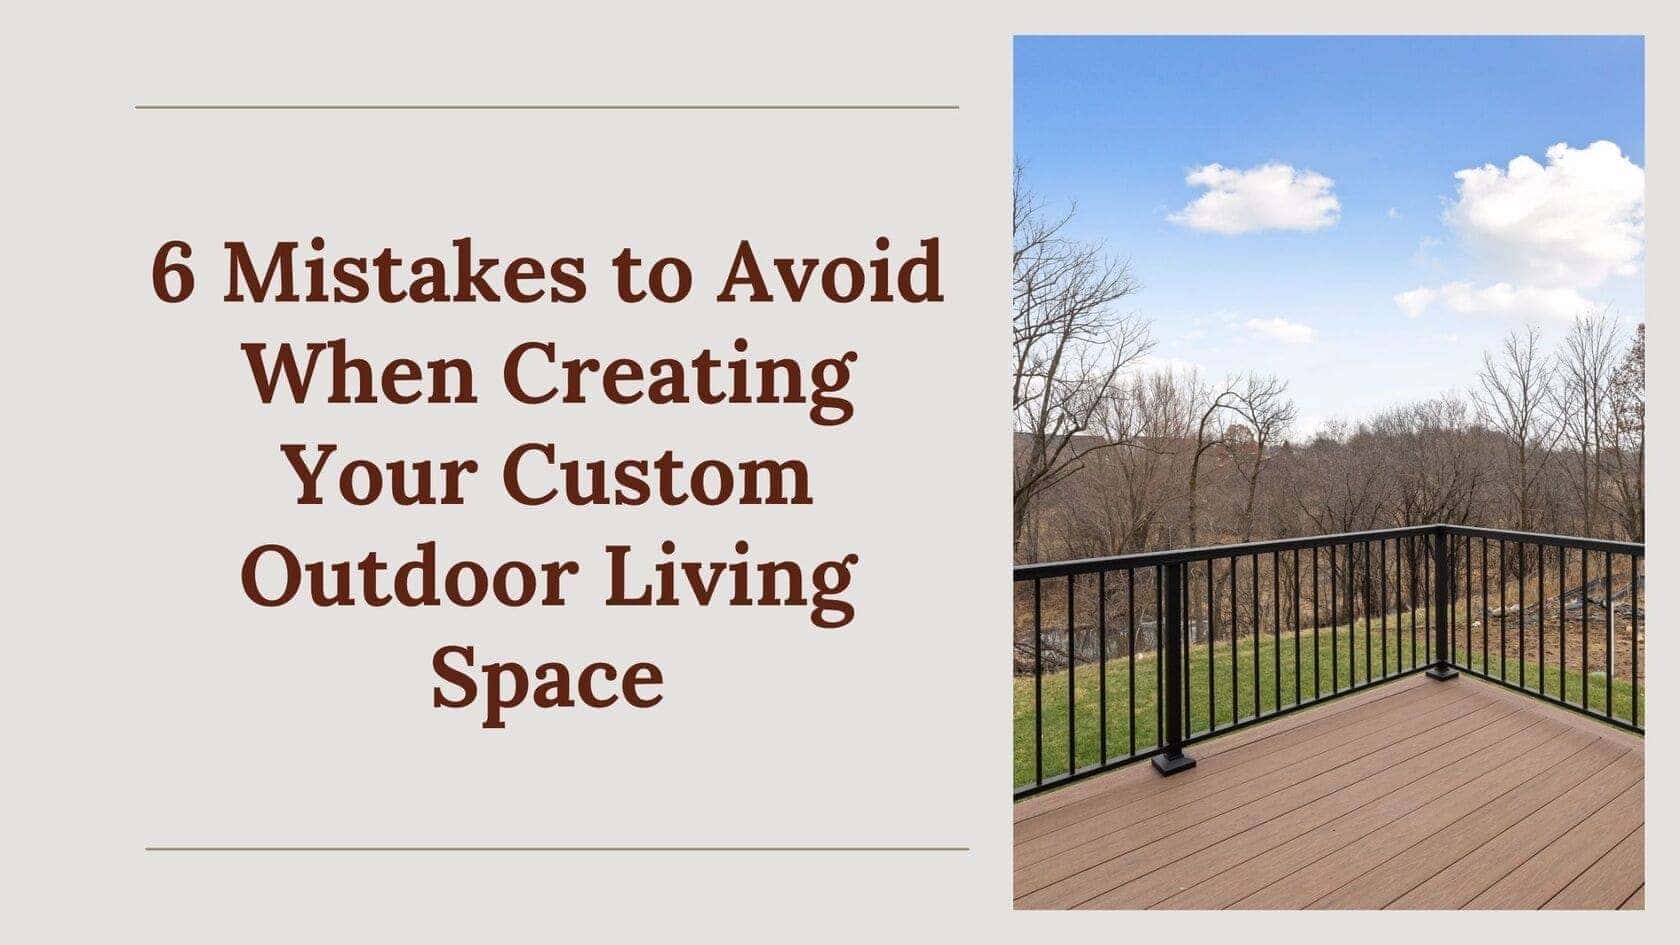 6 Mistakes to Avoid When Creating Your Custom Outdoor Living Space